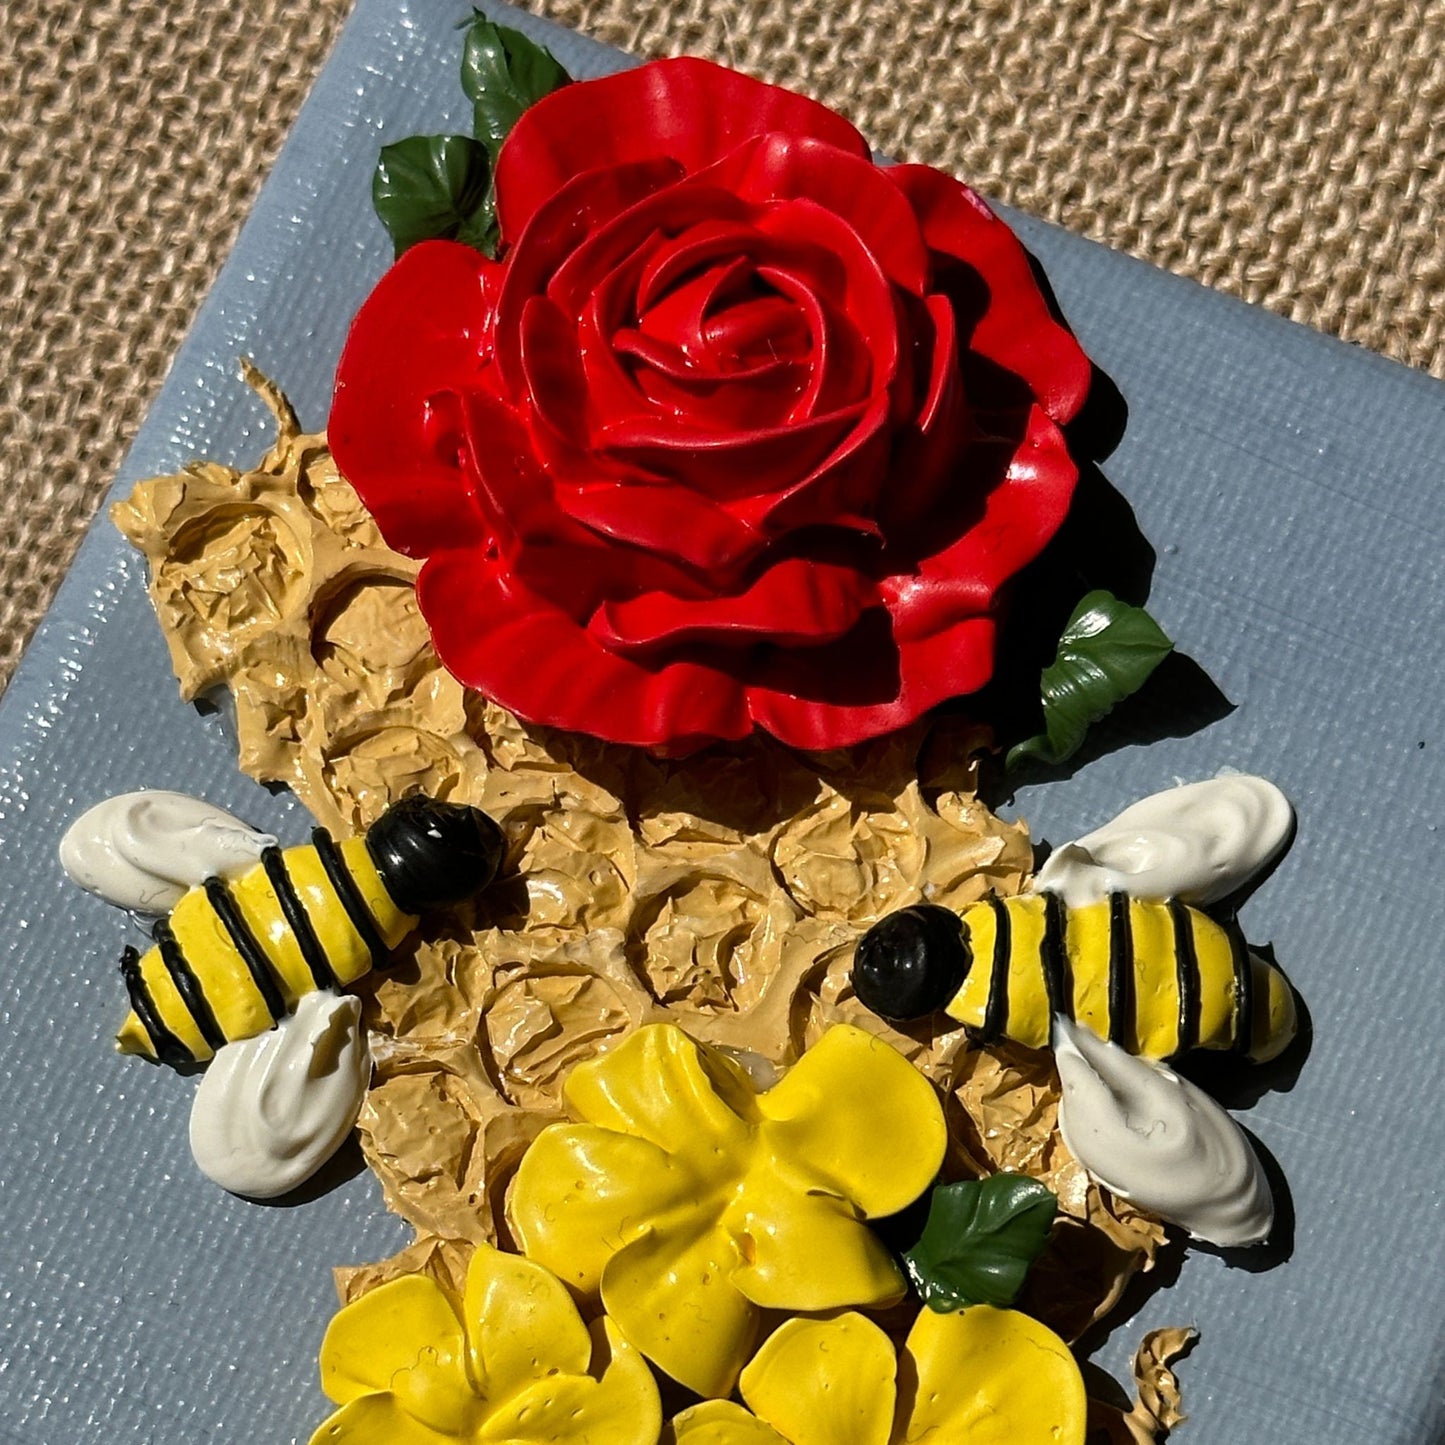 3d Bees And Flowers on Blue Canvas 4"x4"